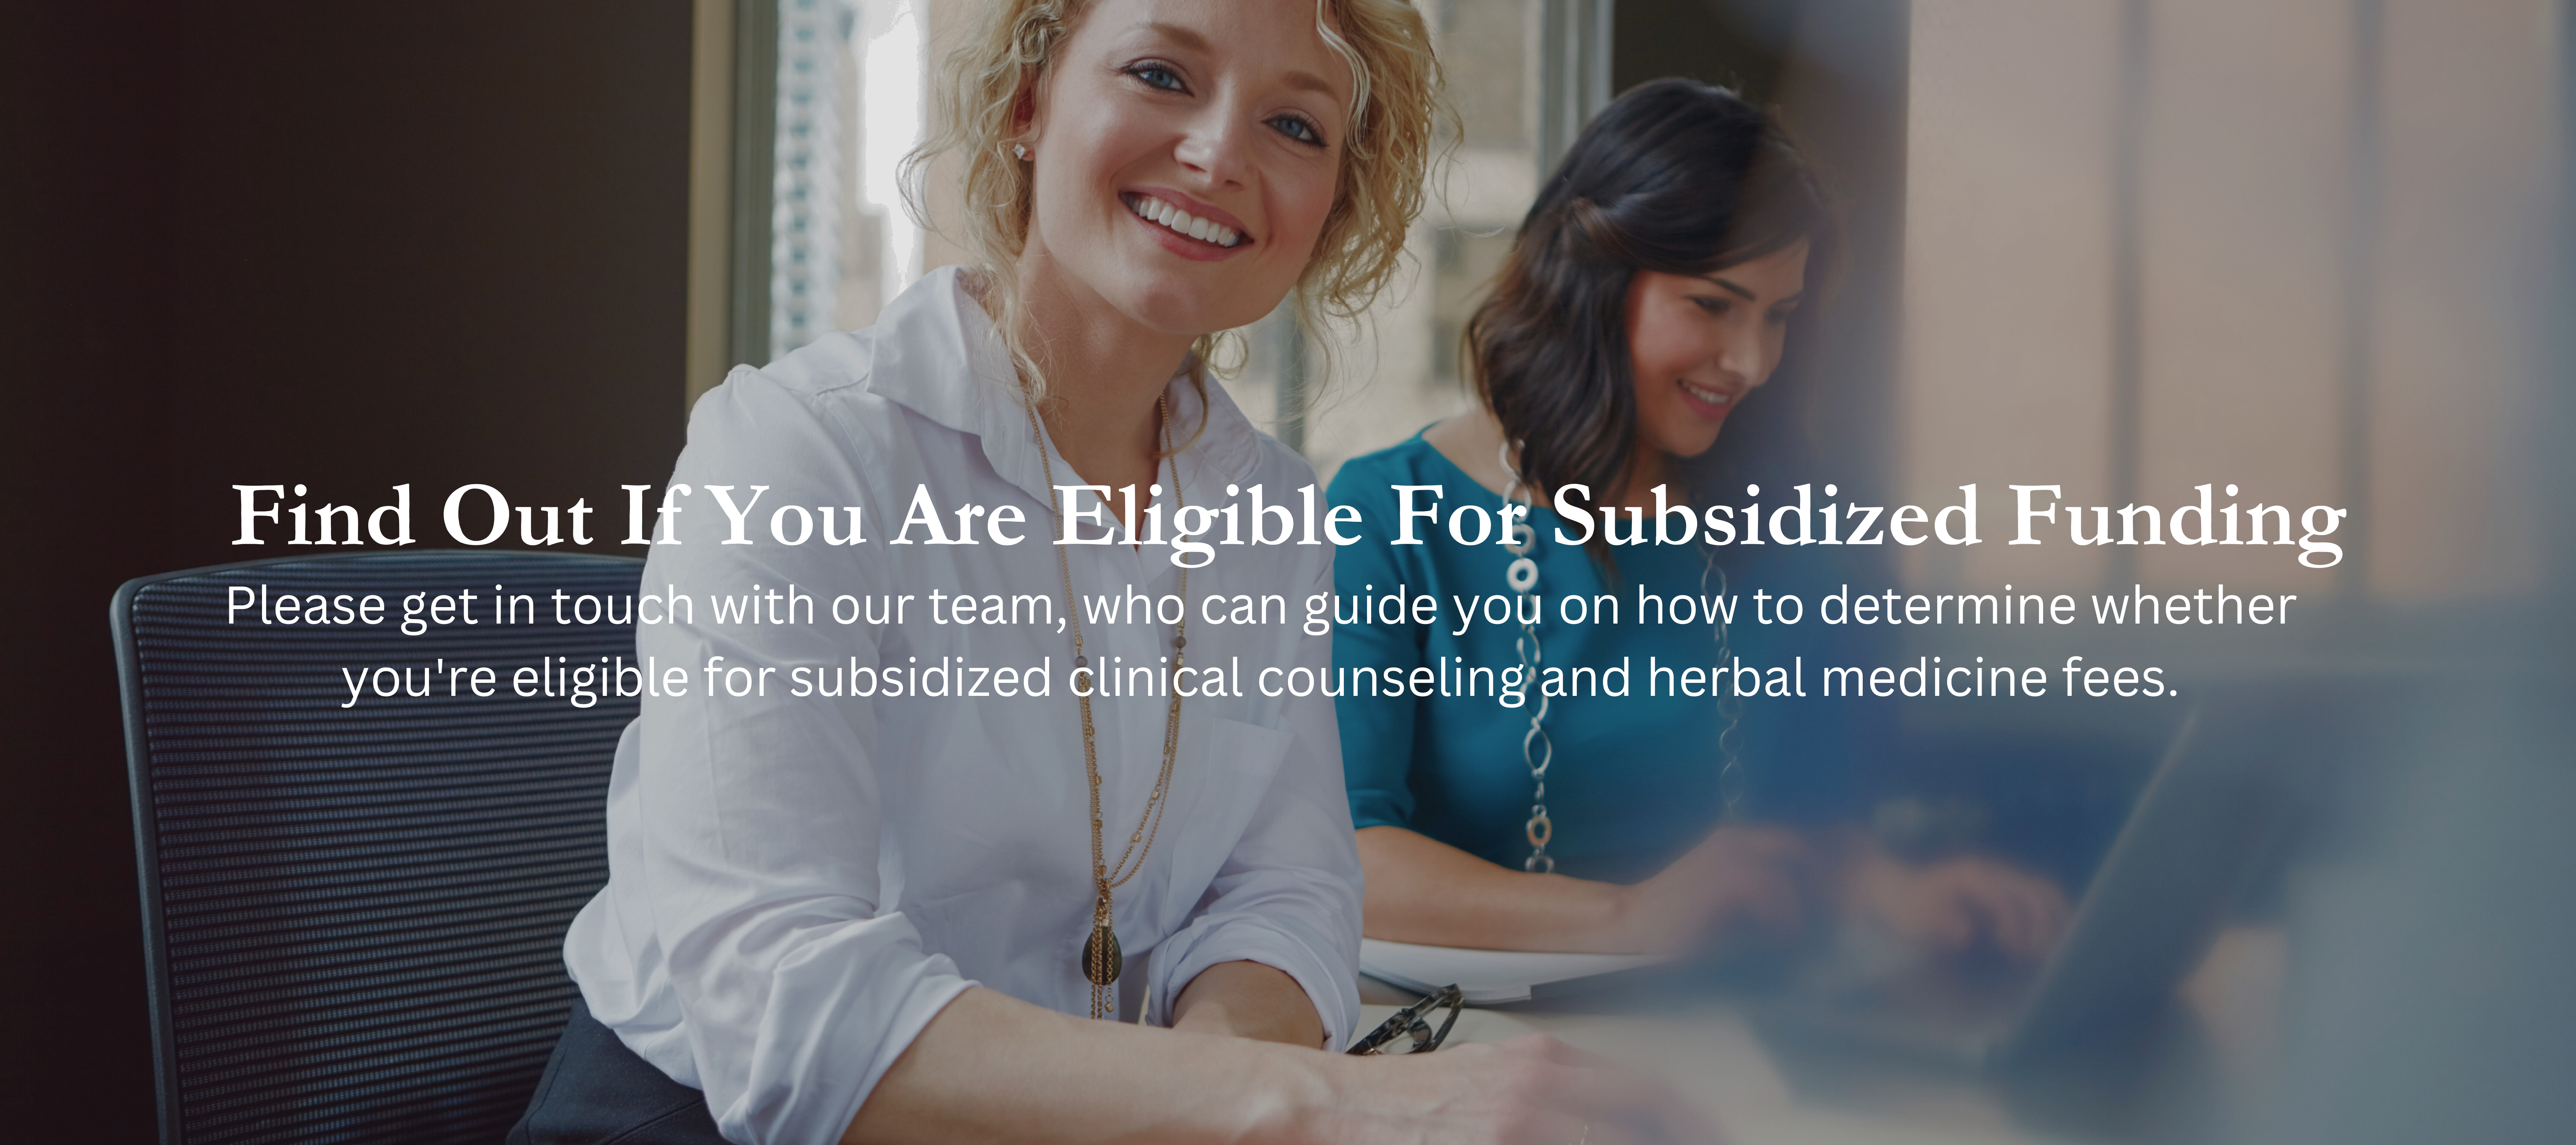 Please get in touch with our team, who can guide you on how to determine whether you're eligible for subsidized clinical counseling and herbal medicine fees.